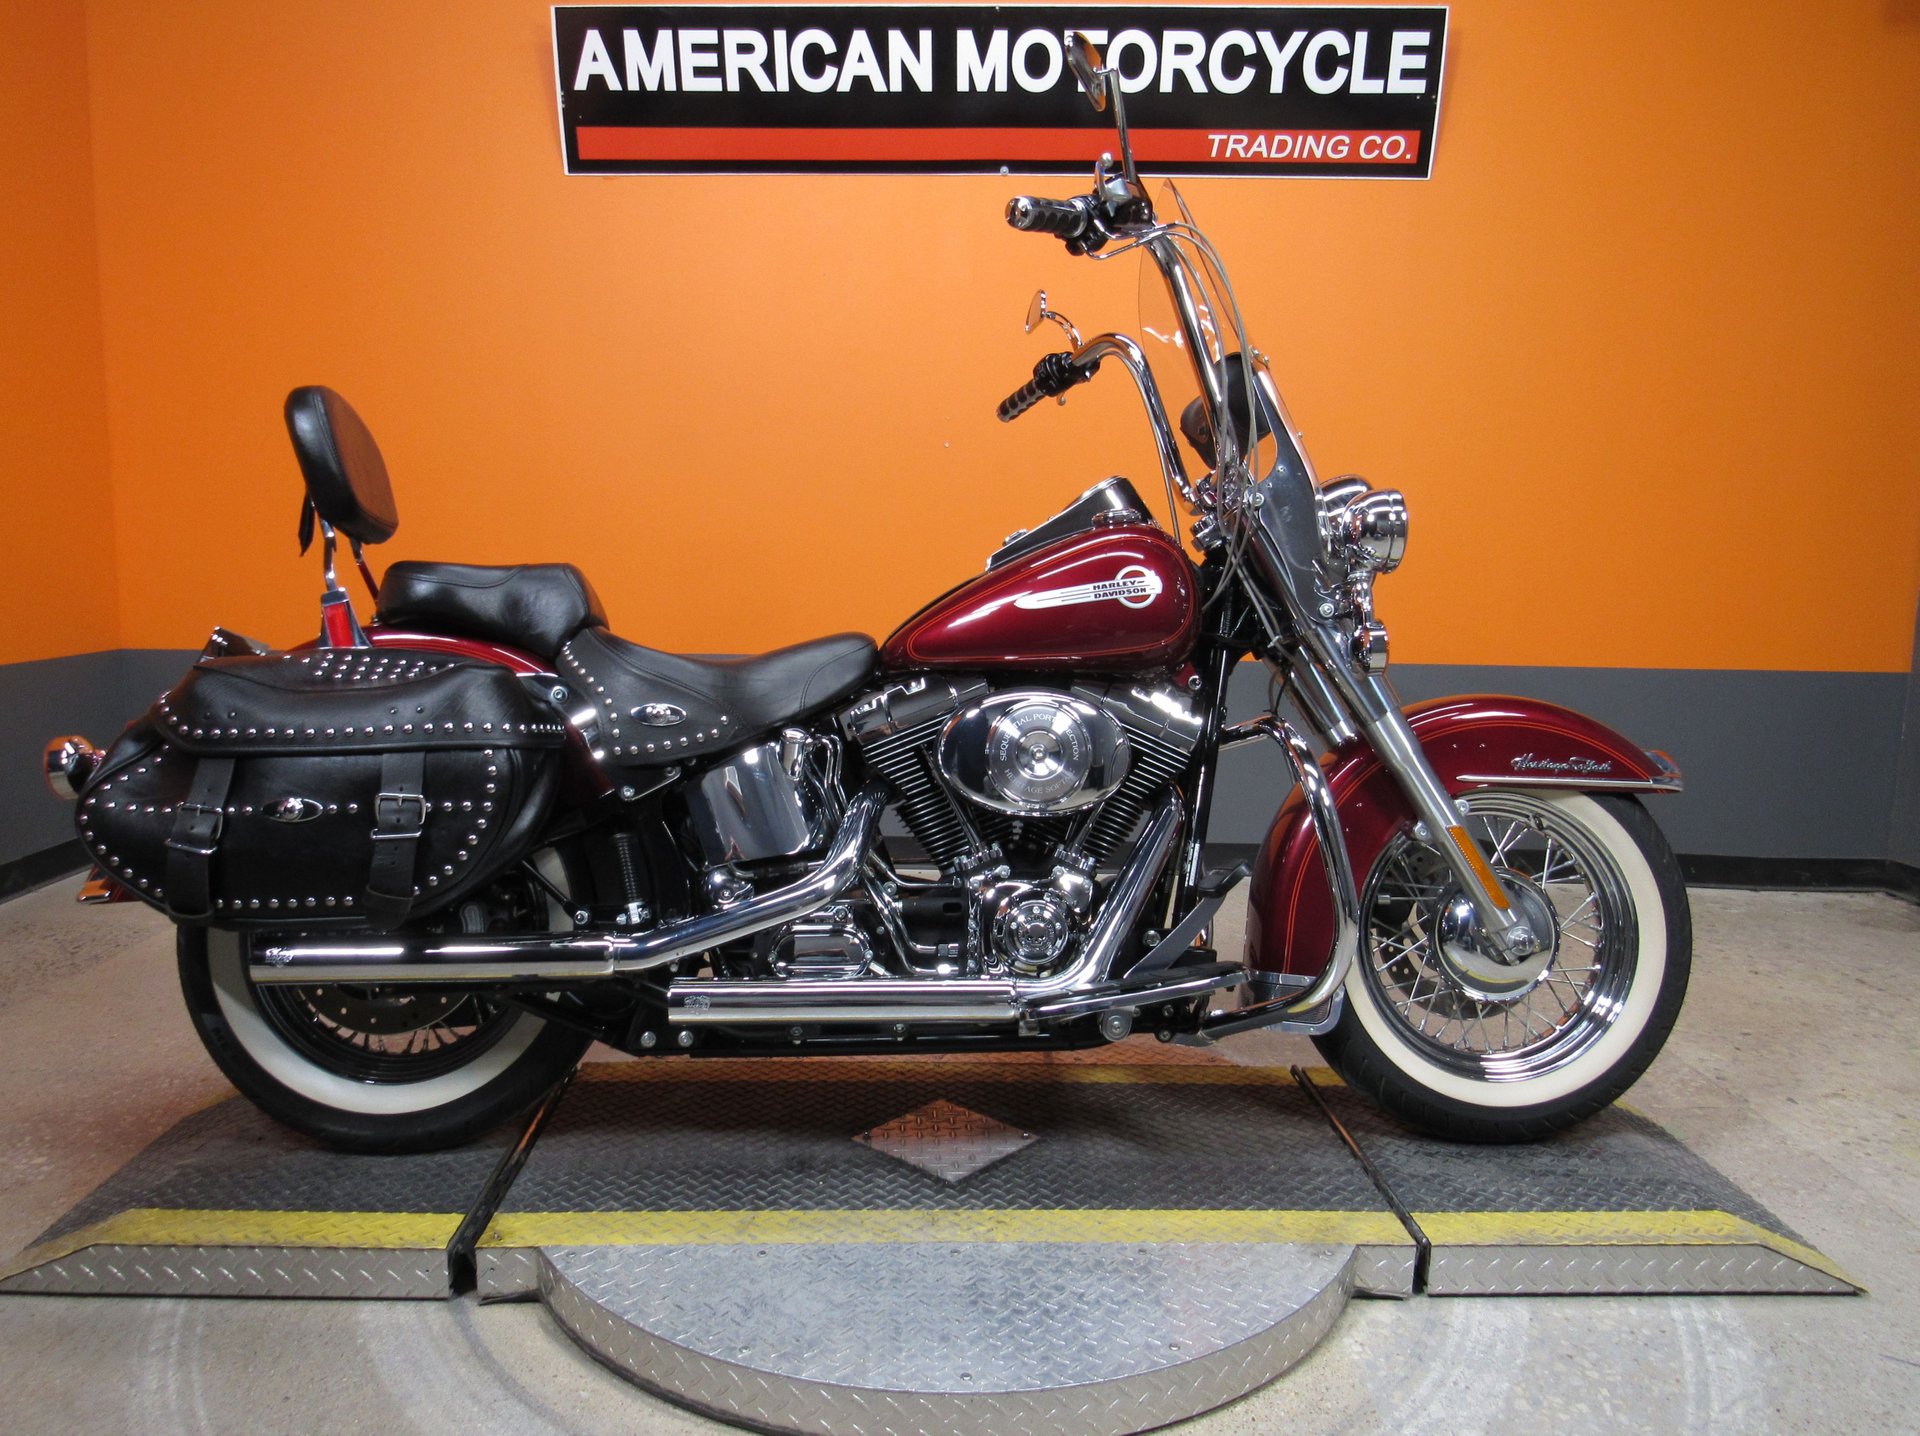 2002 Harley Davidson Softail Heritage Classic American Motorcycle Trading Company Used Harley Davidson Motorcycles